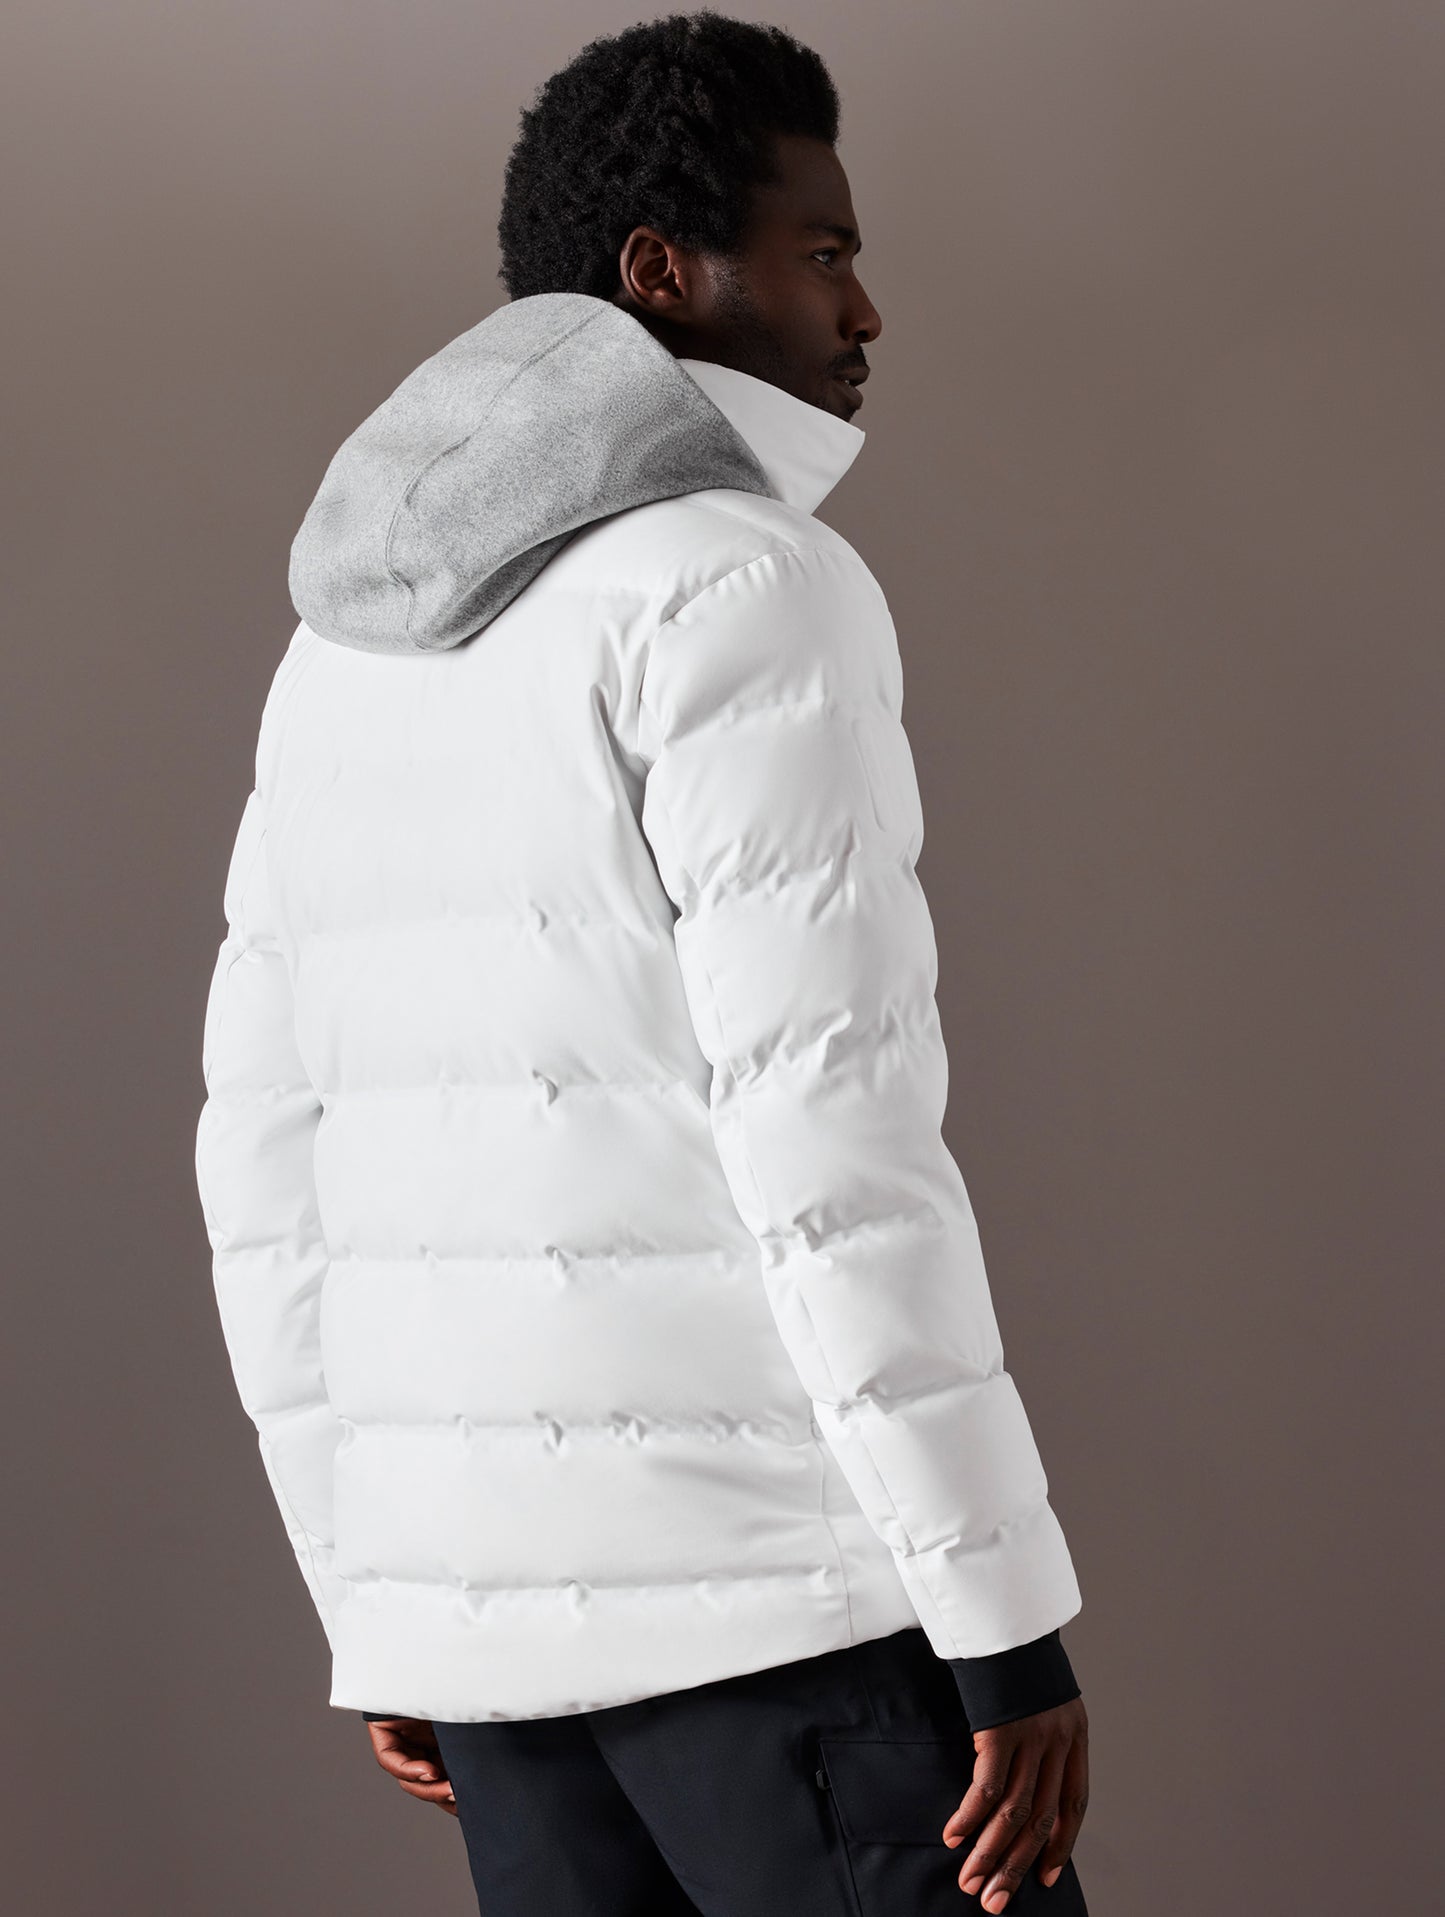 man wearing white ski jacket from AETHER Apparel